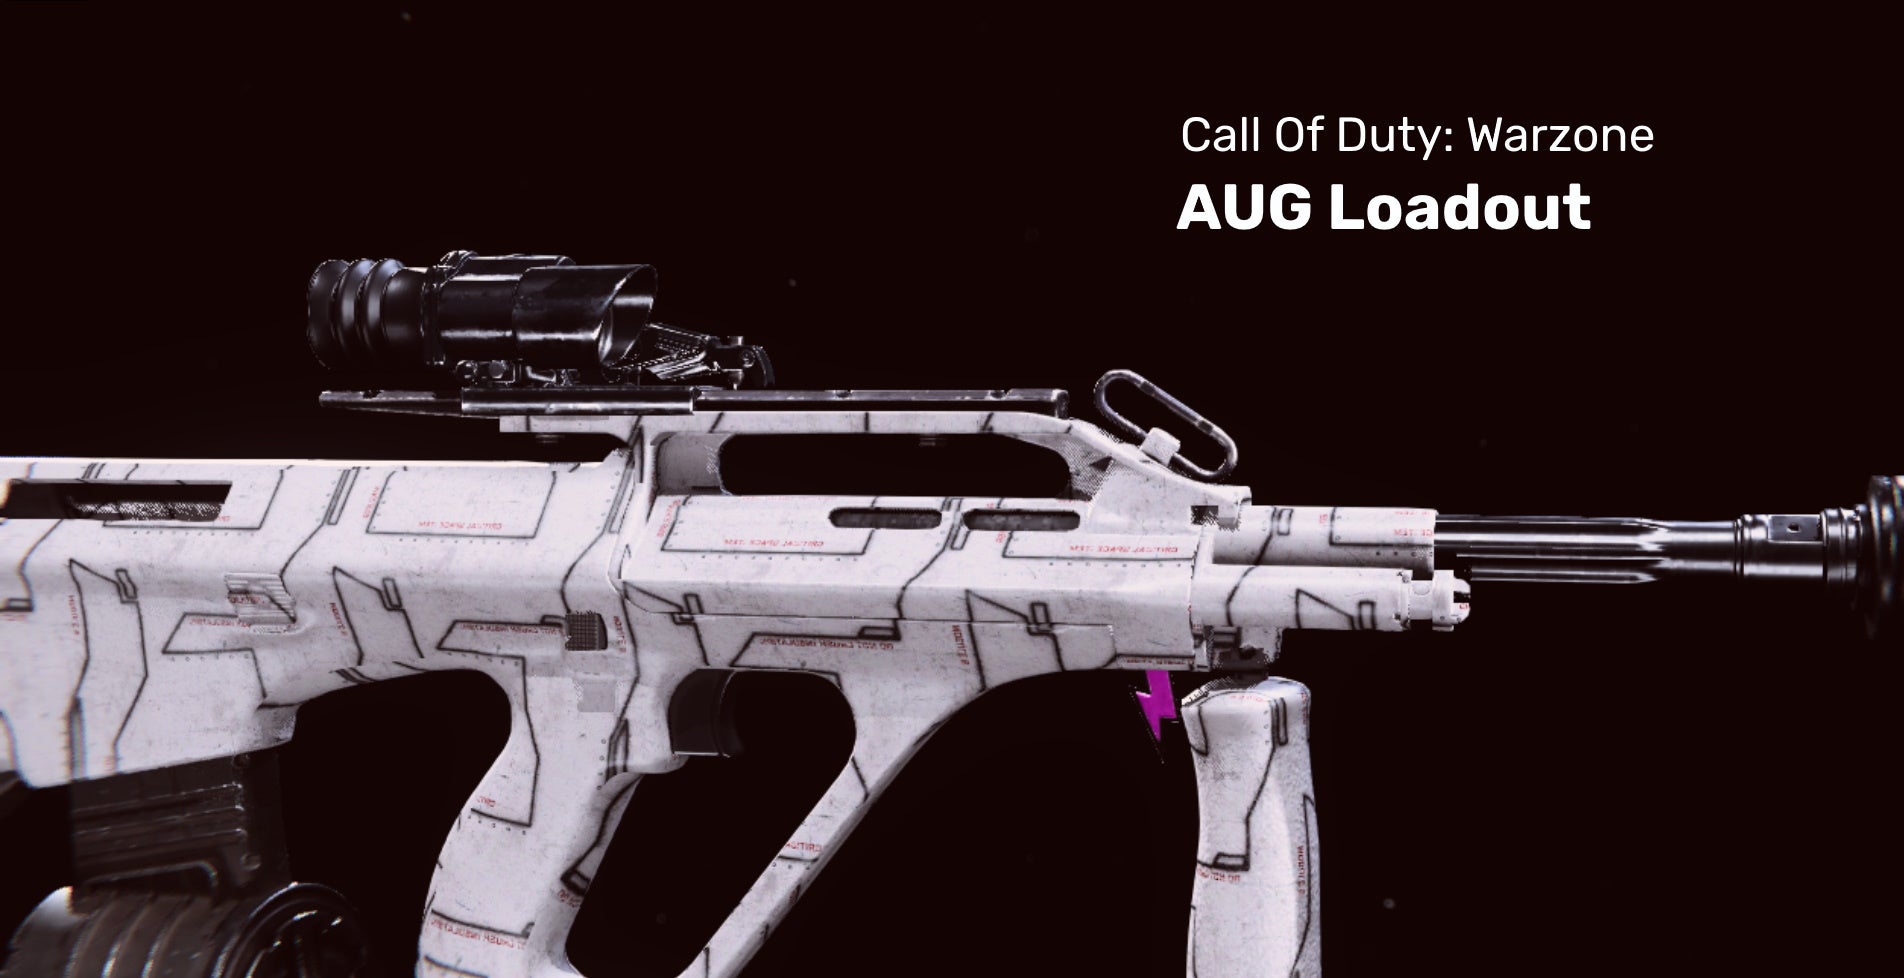 An AUG from Call of Duty Warzone on a blank background.